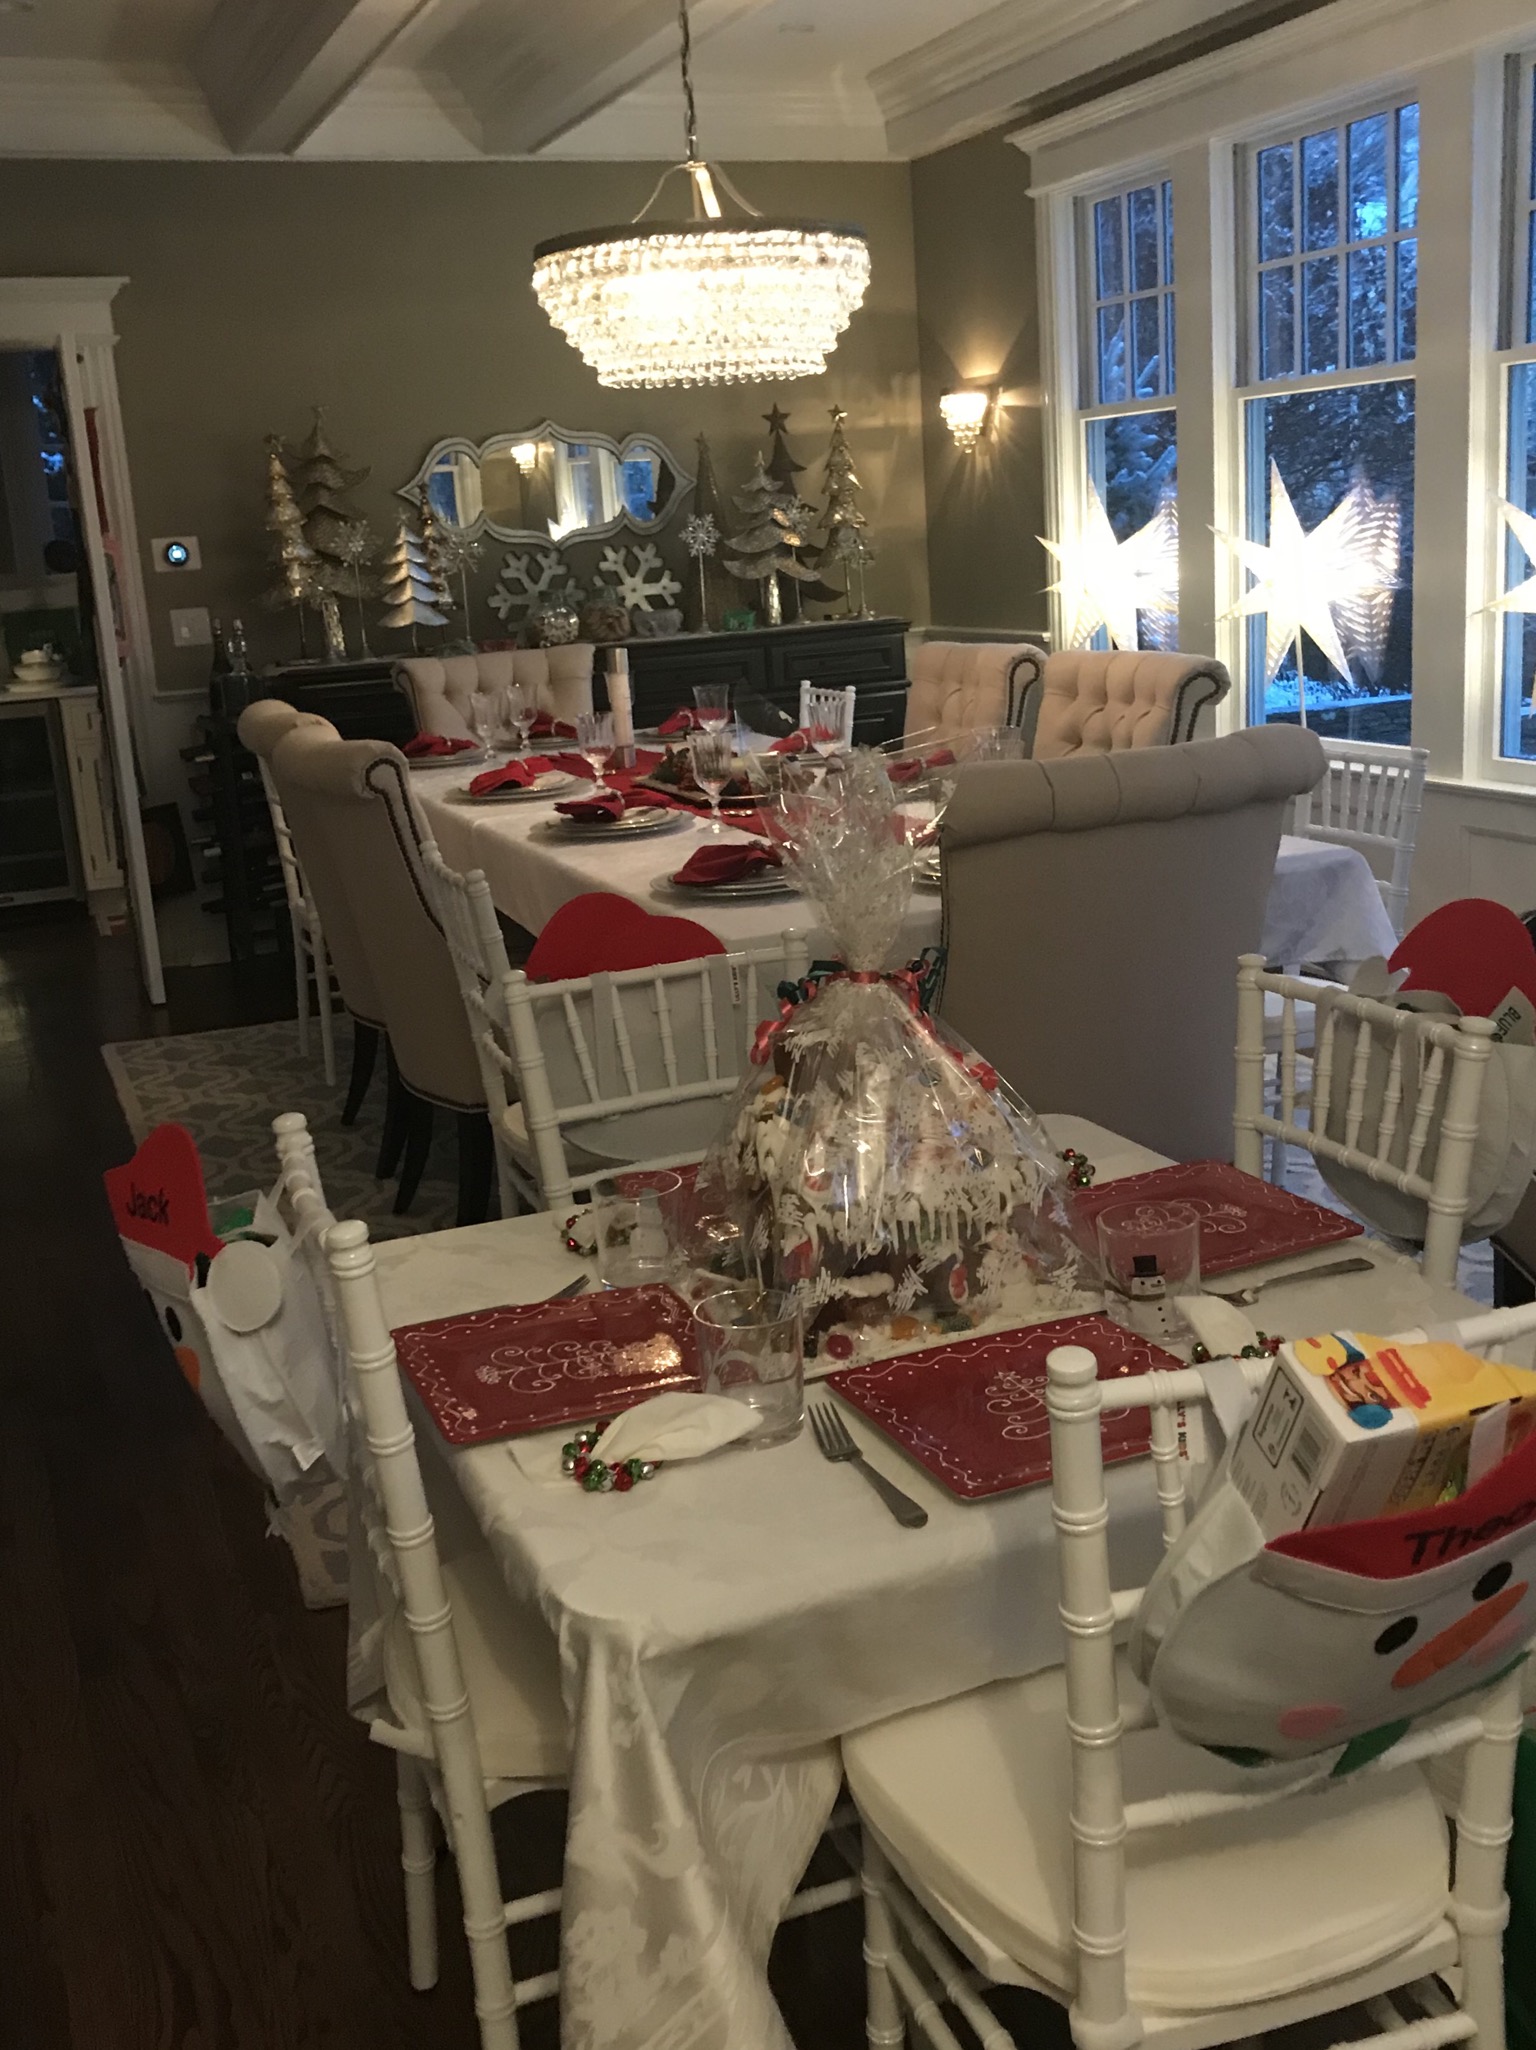 The chiavari chairs were perfect for our adult & kids’ holiday tables.